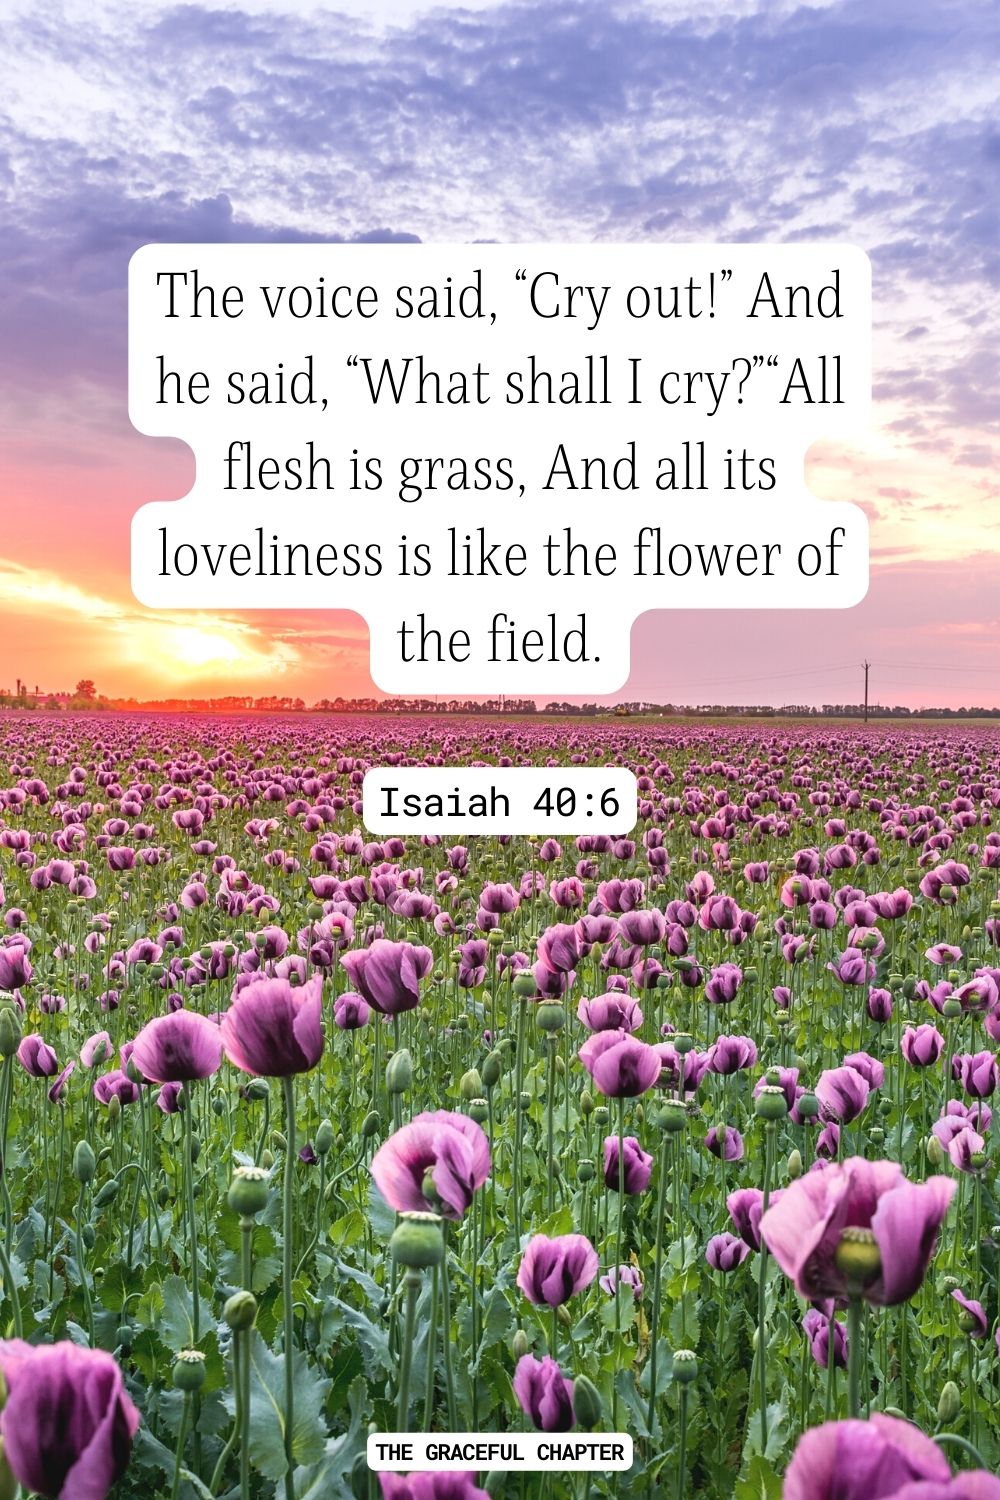 The voice said, “Cry out!” And he said, “What shall I cry? All flesh is grass, And all its loveliness is like the flower of the field. Isaiah 40:6